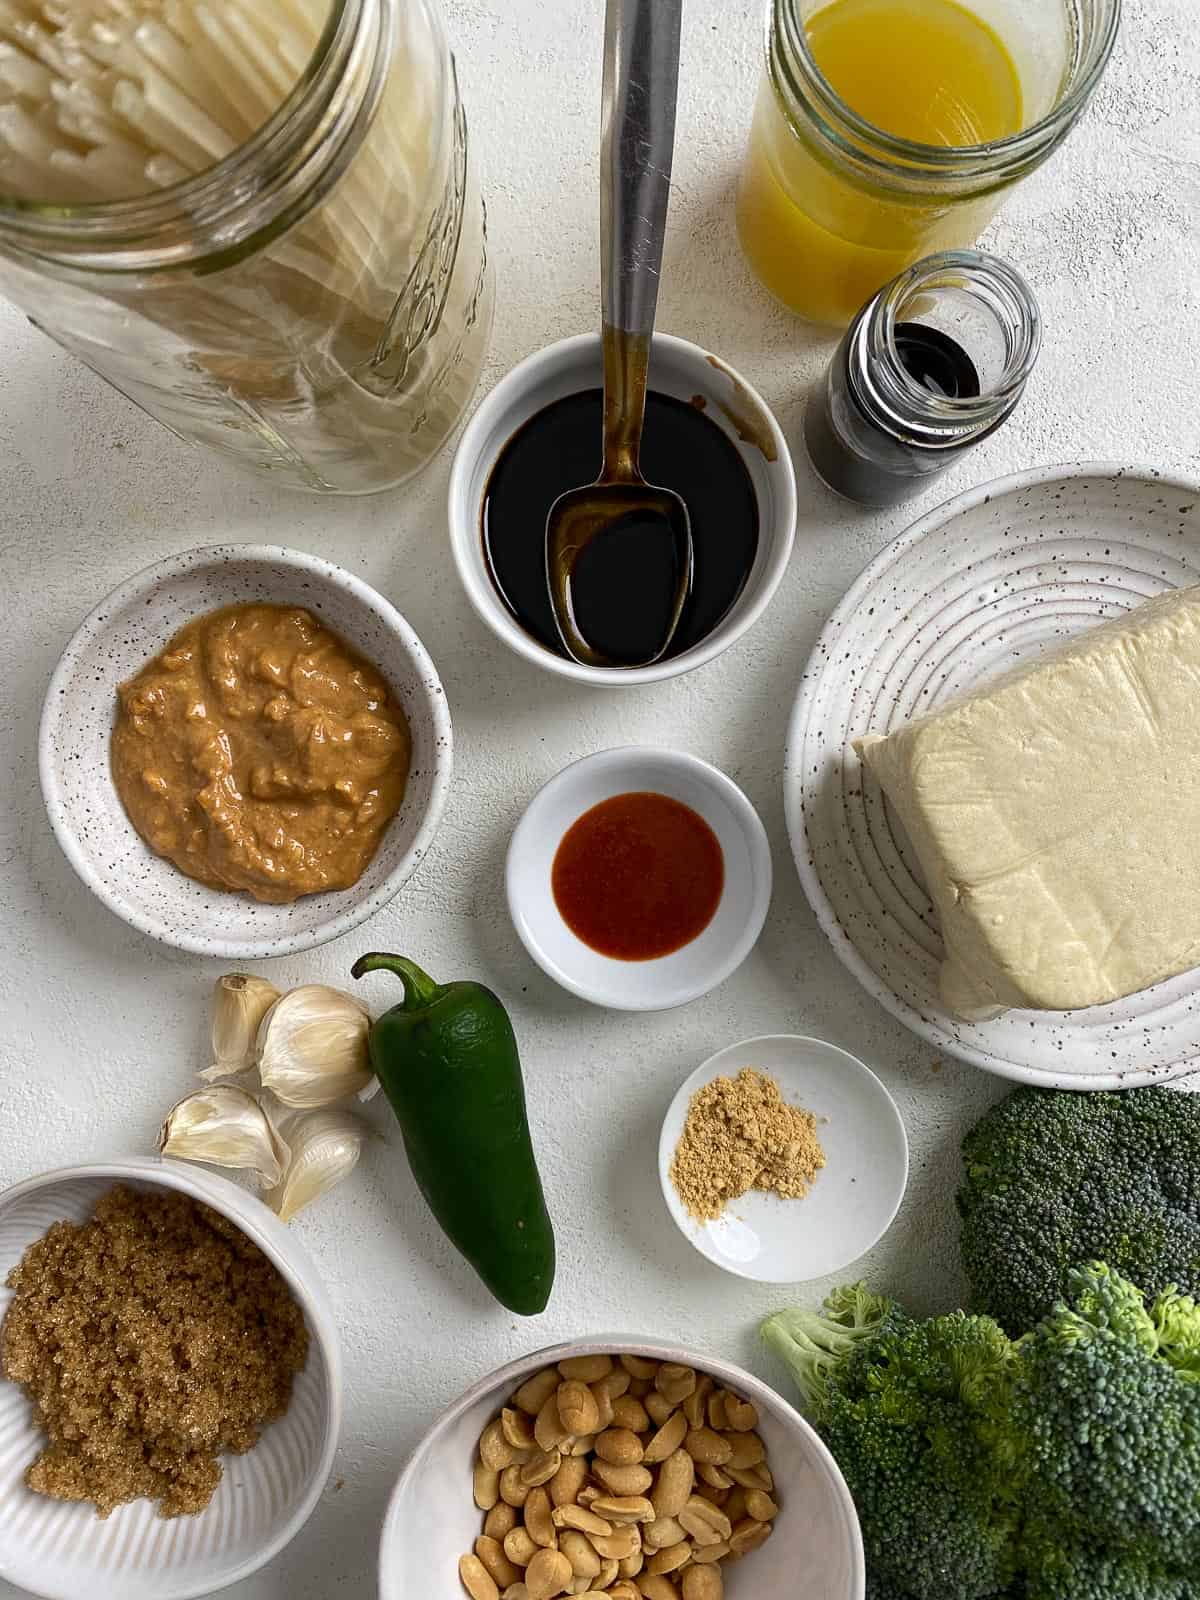 ingredients for Tofu Pad Thai measured out against a light surface